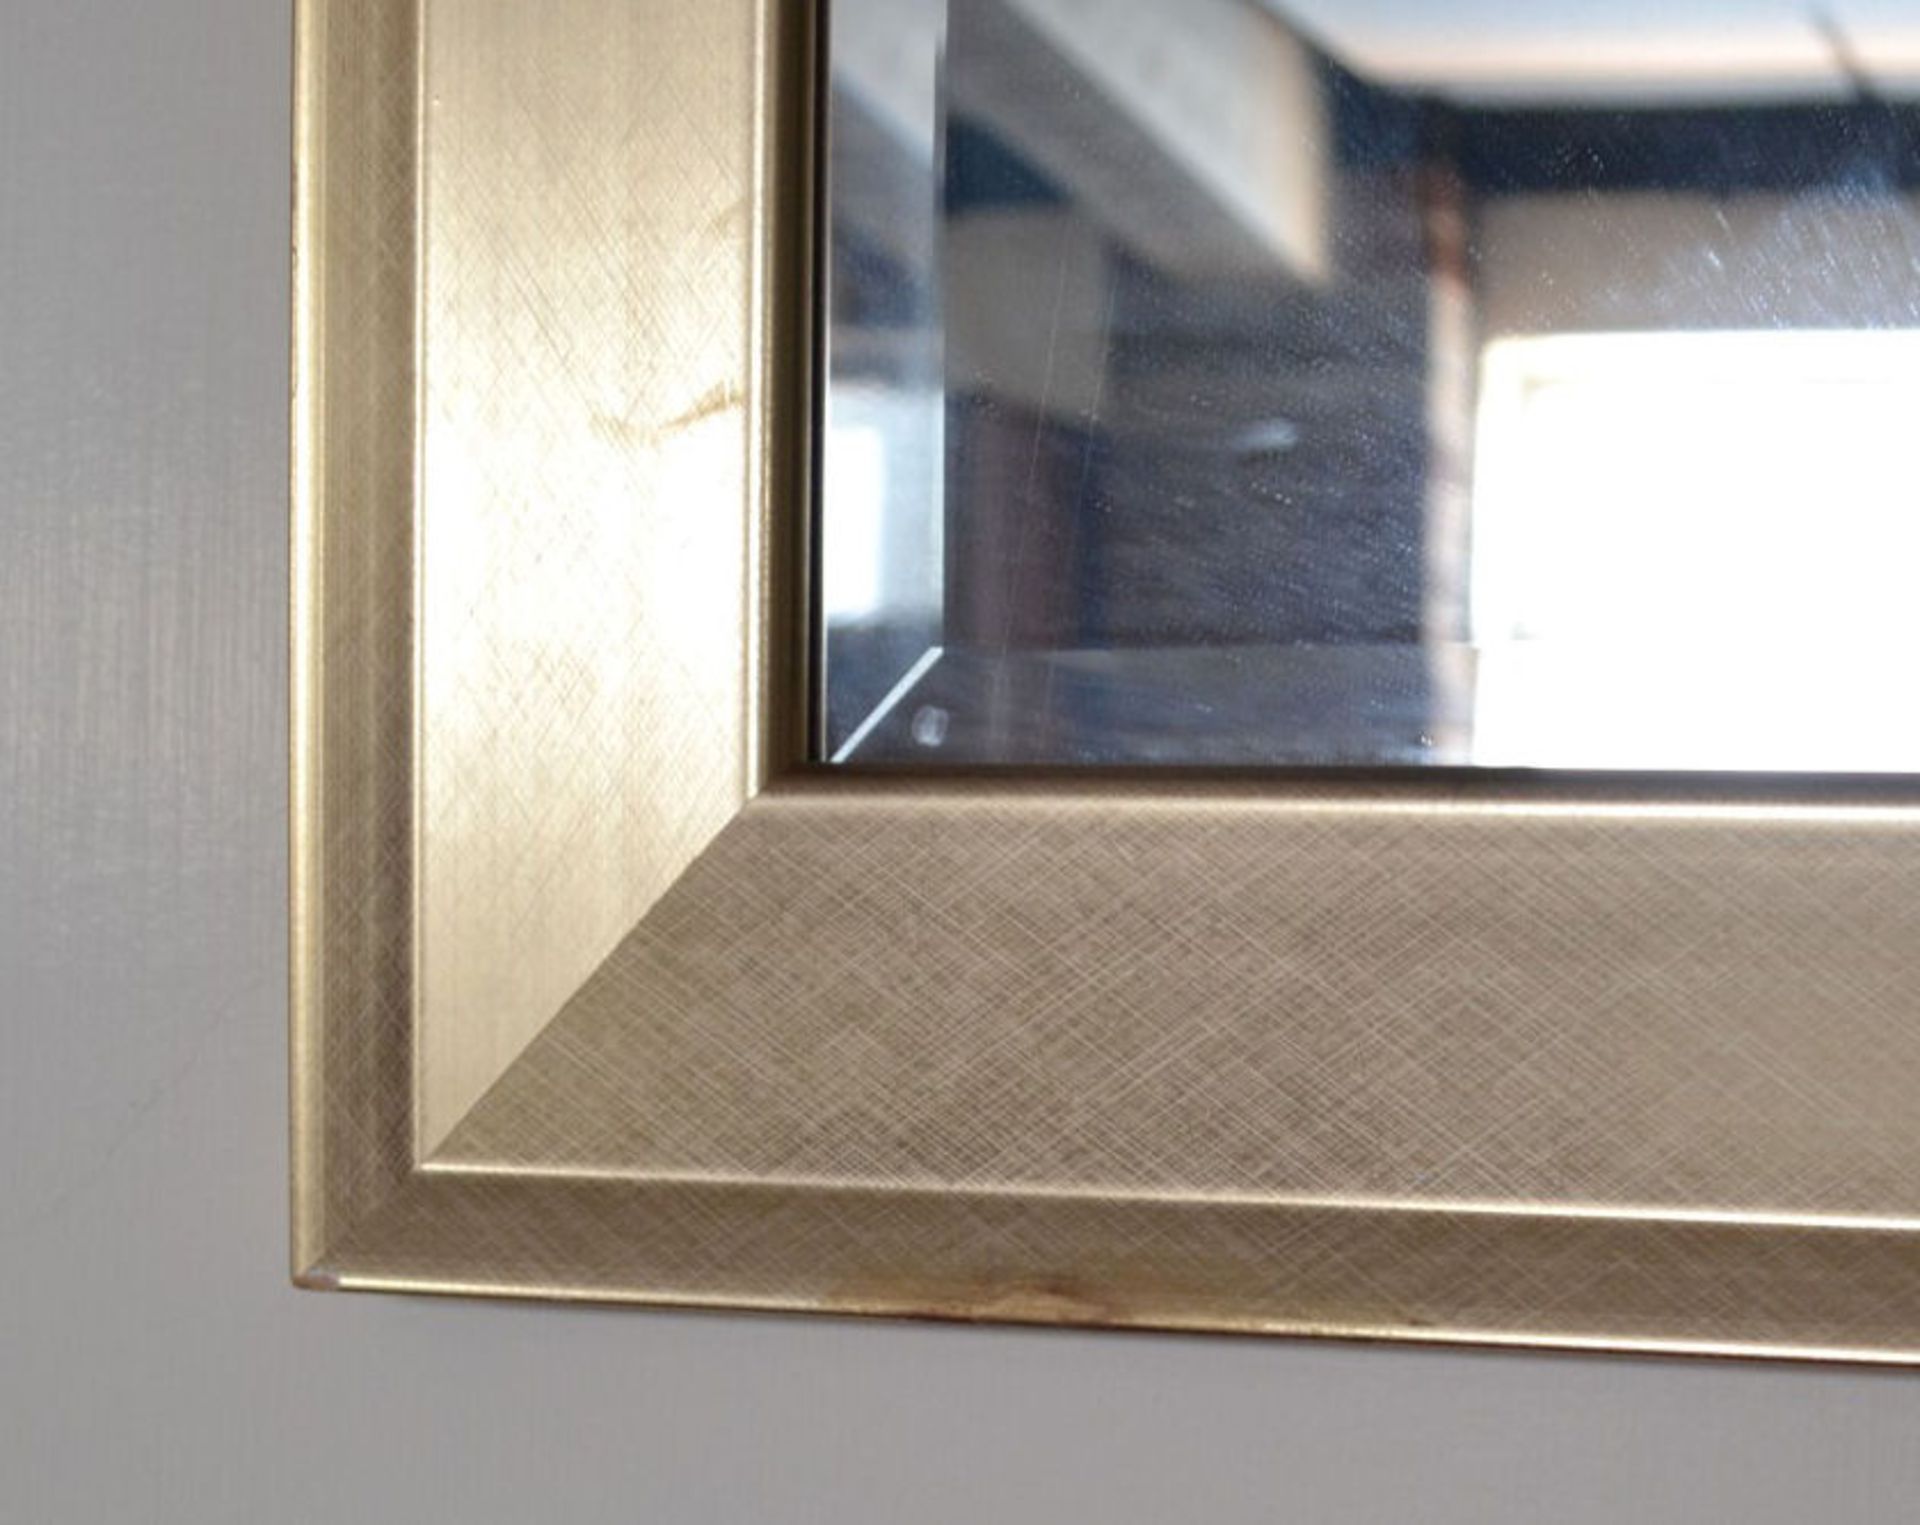 1 x Gold Surround Mirror. 105cm Long. 75cm Tall. Frame Is Around 7.5cm Wide. - Image 5 of 6